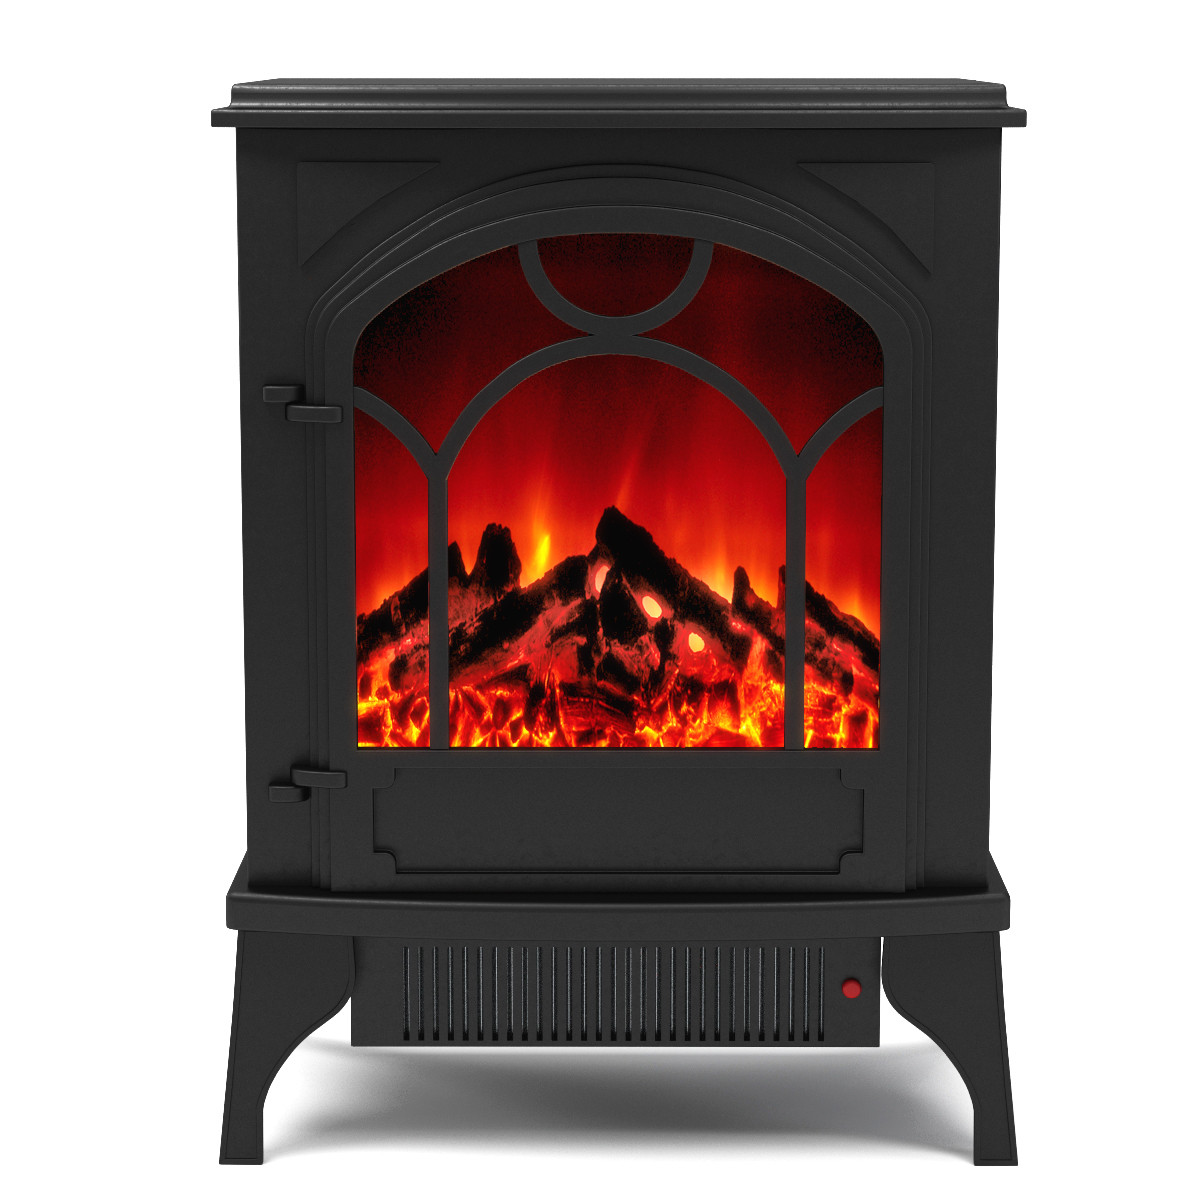 Electric Fireplace Space Heater
 Aries Electric Fireplace Free Standing Portable Space